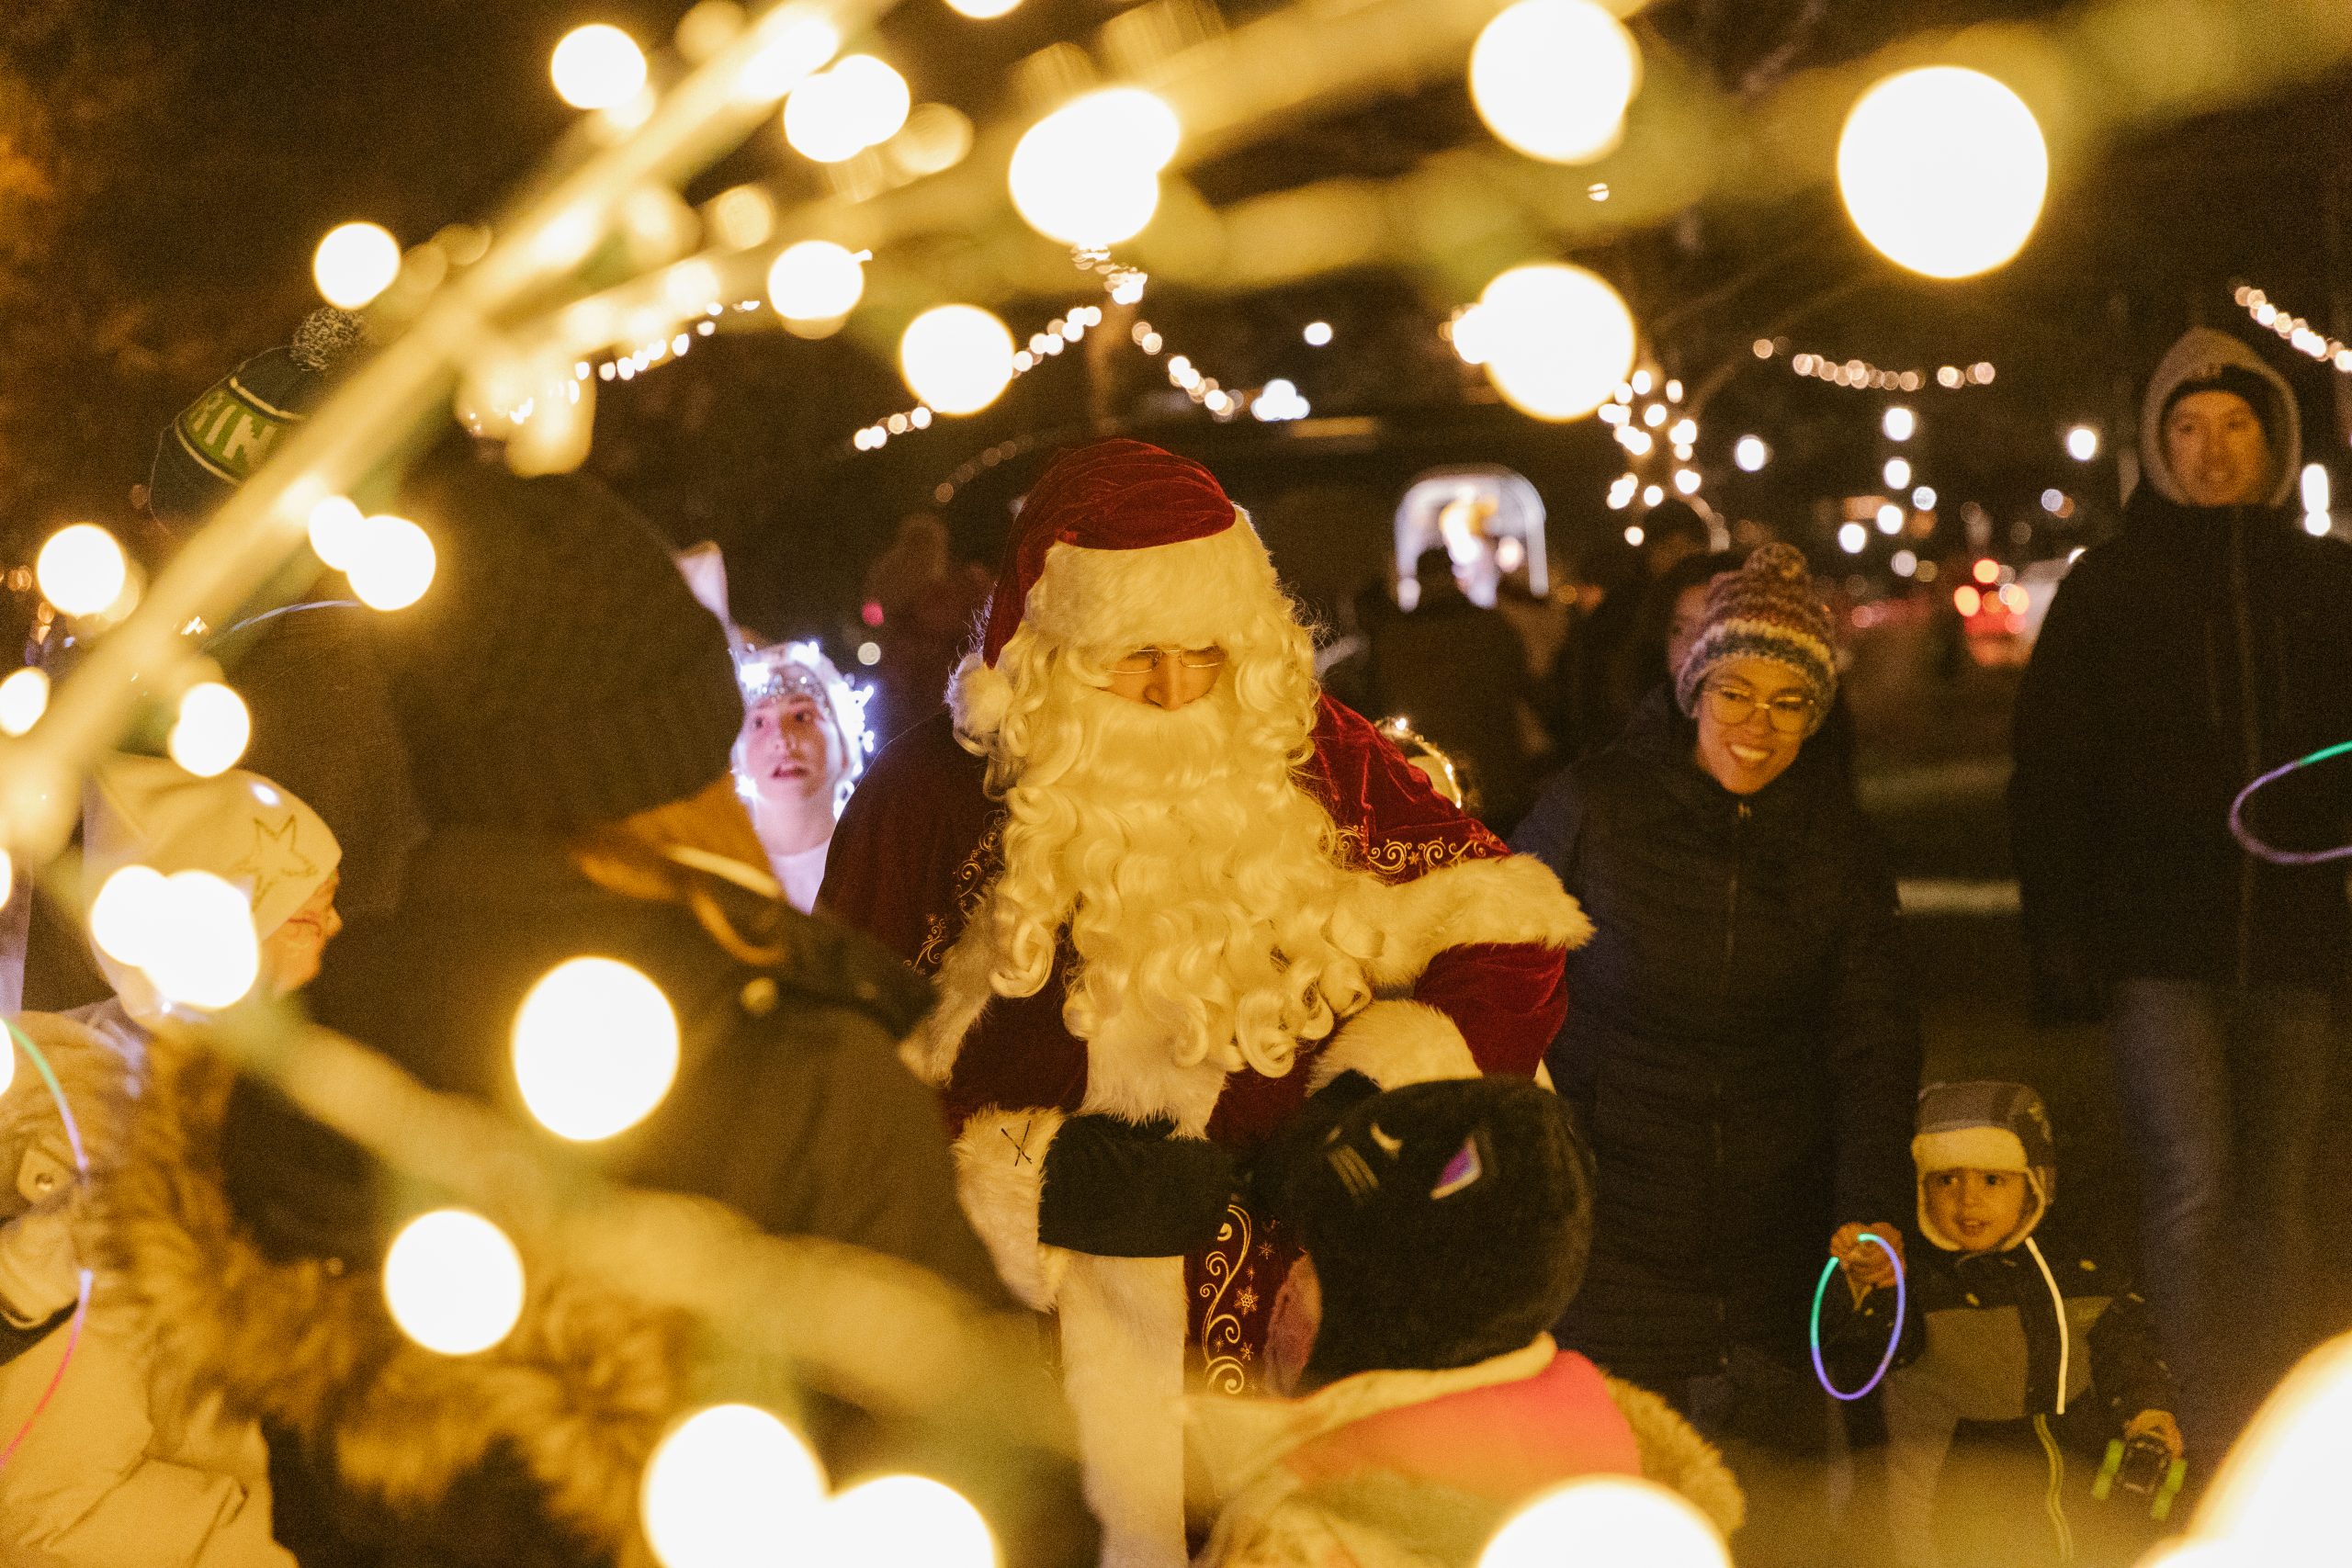 Santa Claus at the Let It Glow - A Celebration of Light event in Port Dalhousie.